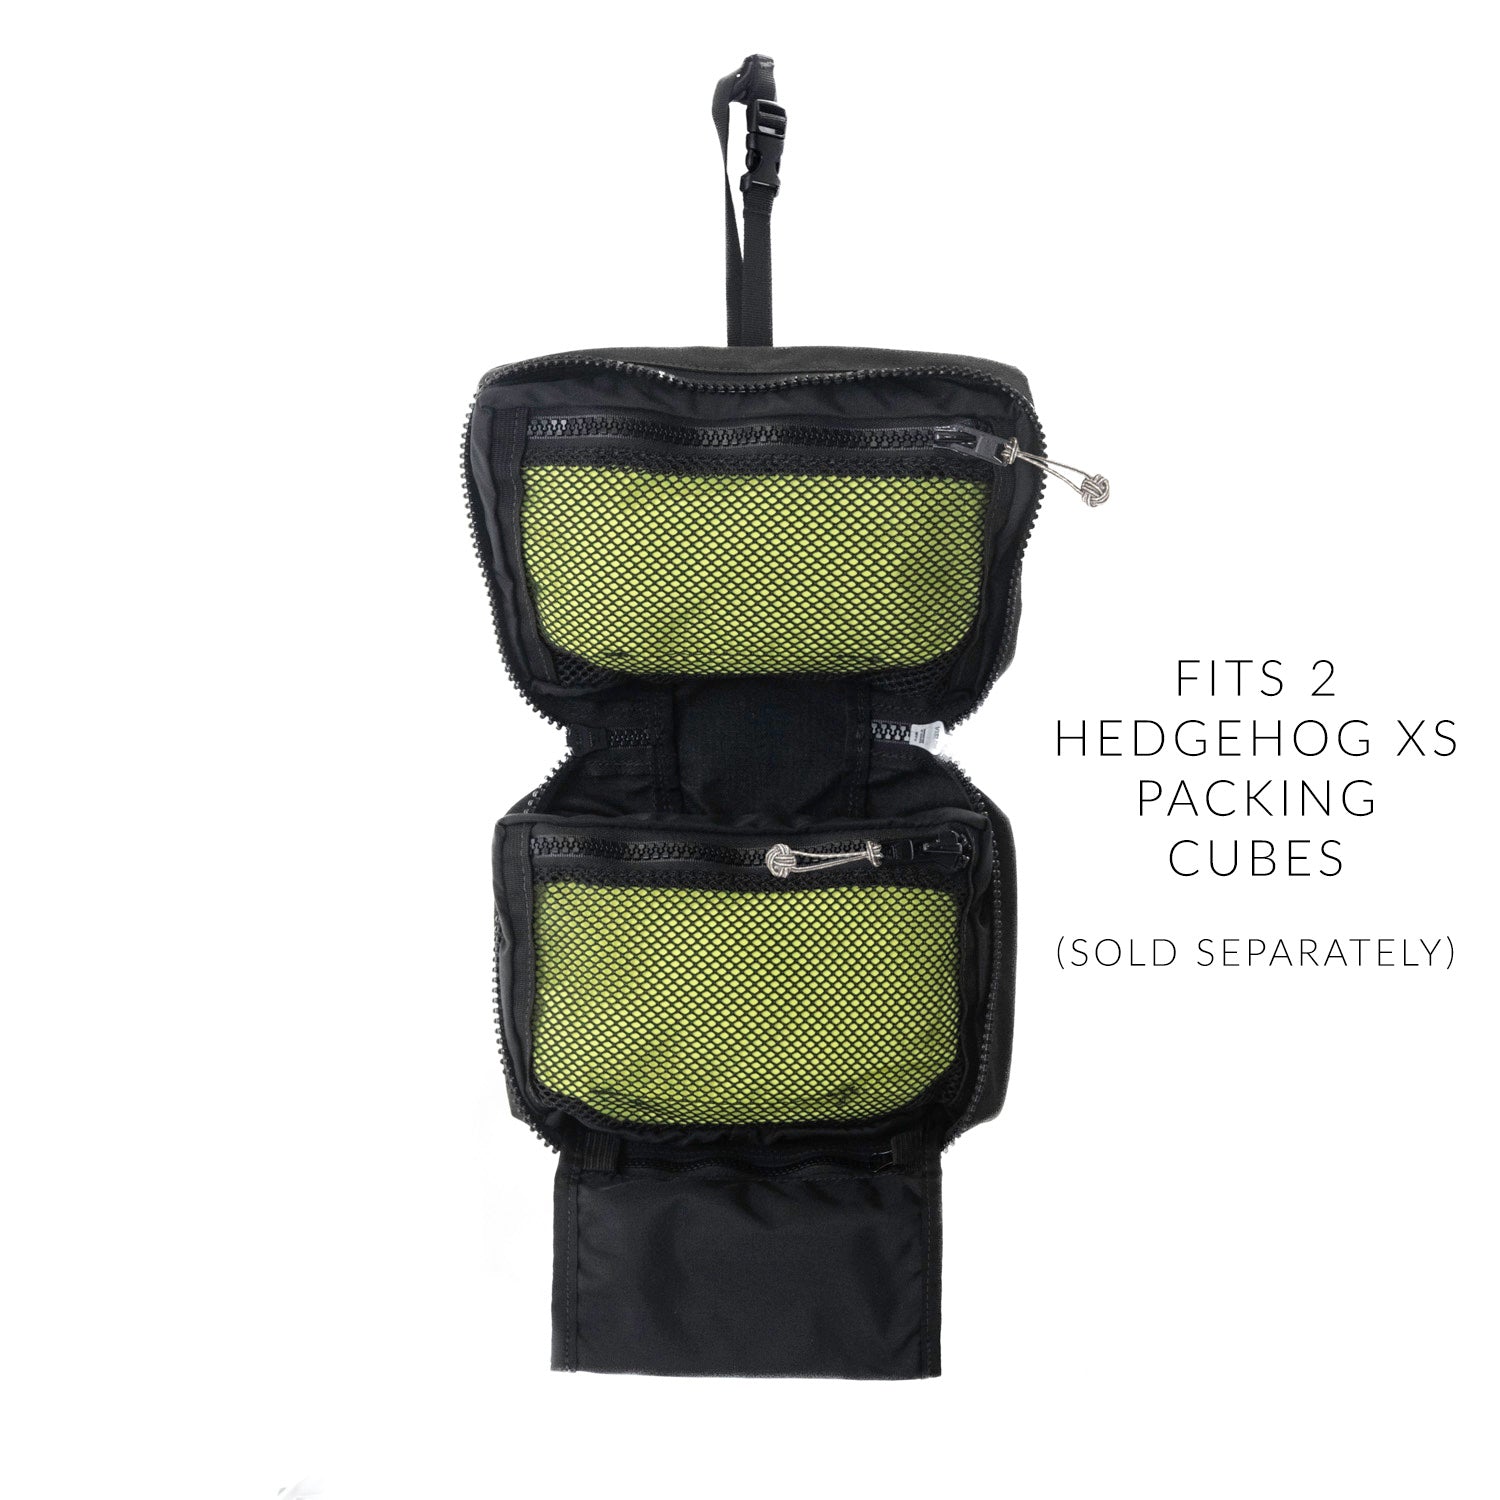 Fits 2 Hedgehog XS packing cubes (sold seperately)